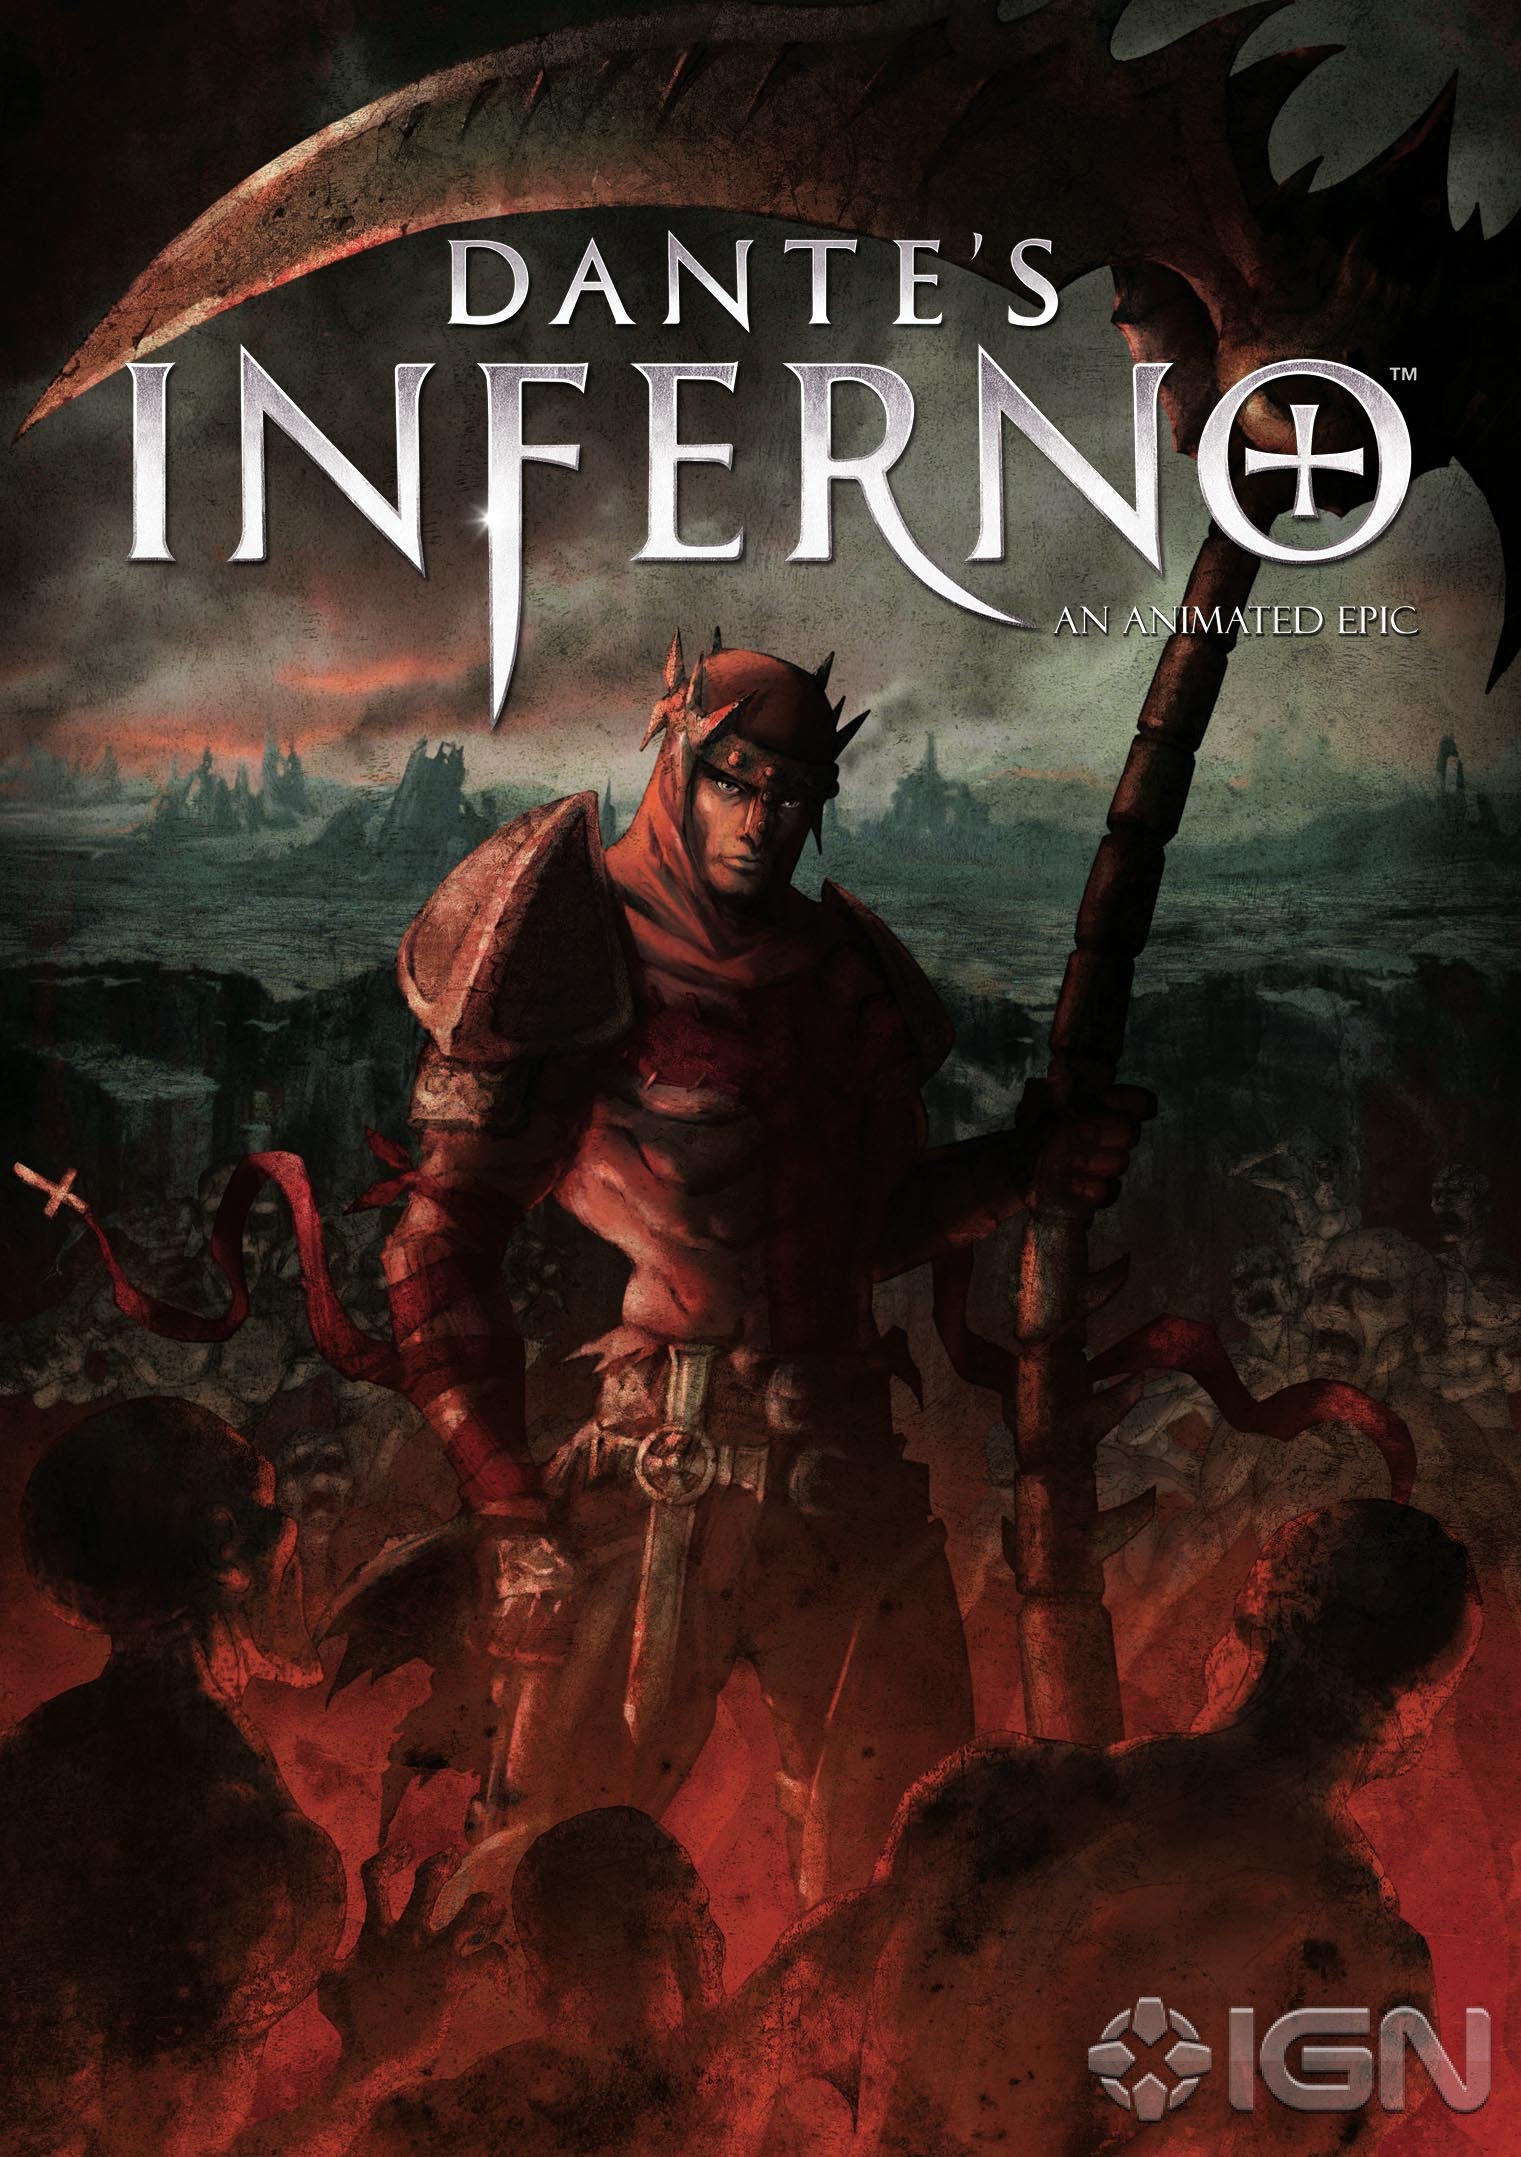 Dantes Inferno 2  Dantes inferno, Dante's inferno game, Epic of